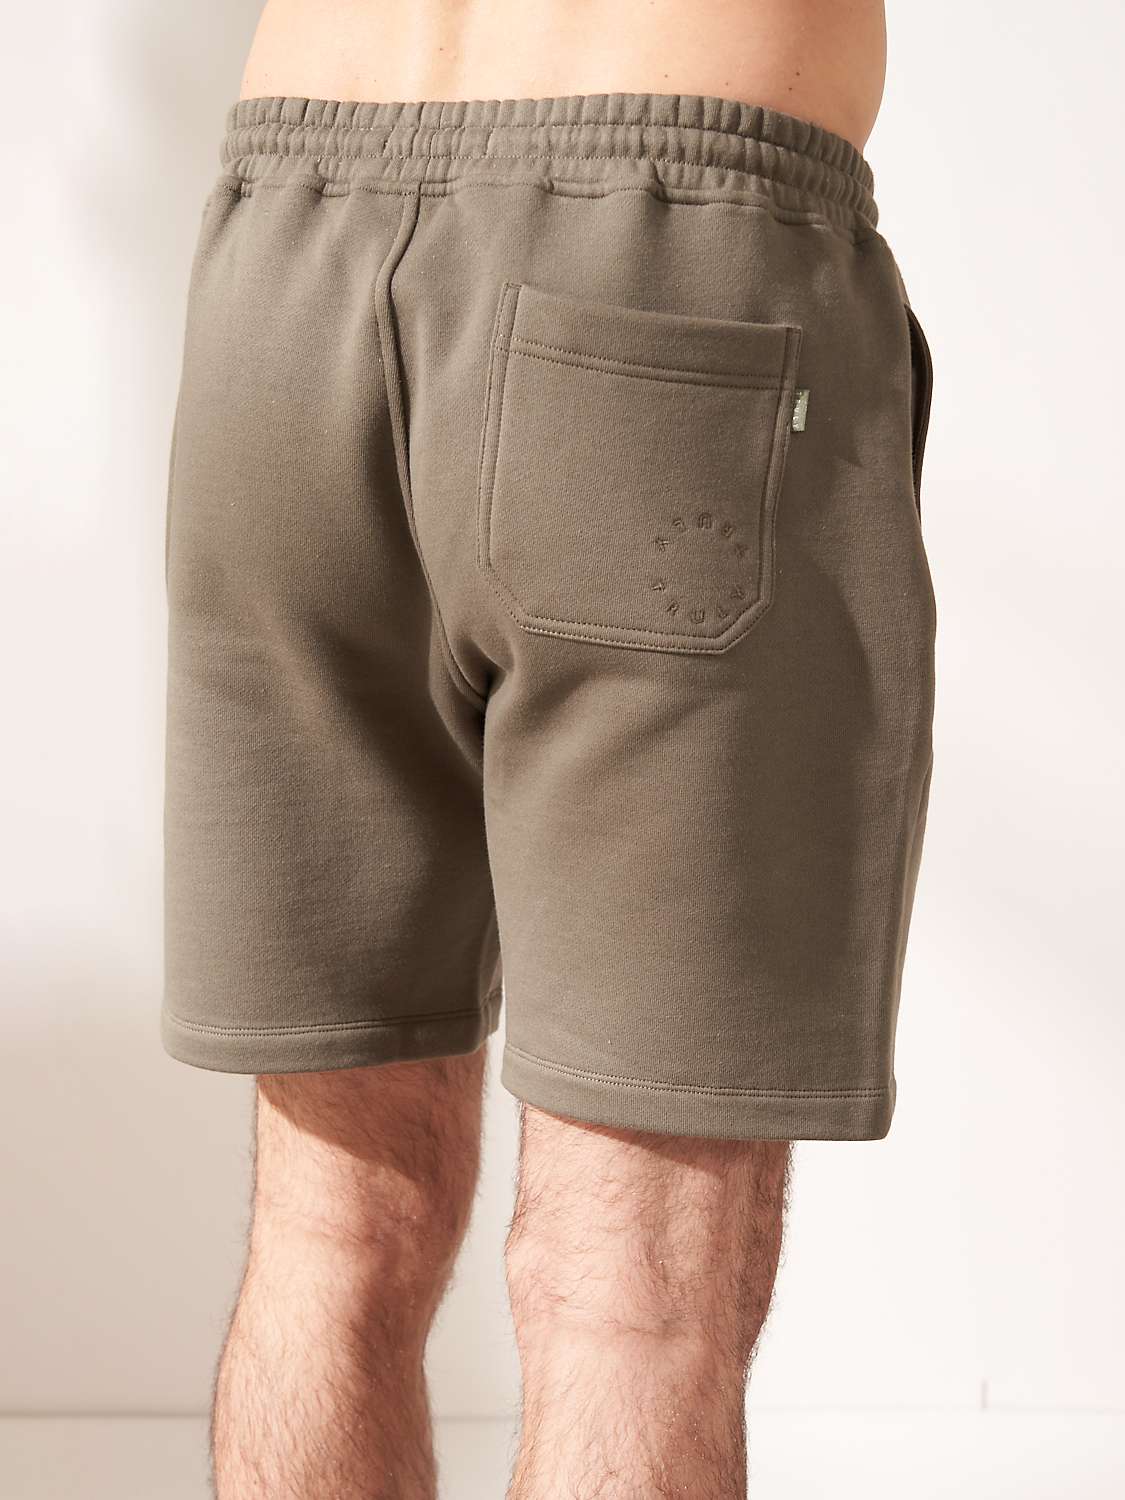 Buy Truly Shorts Online at johnlewis.com